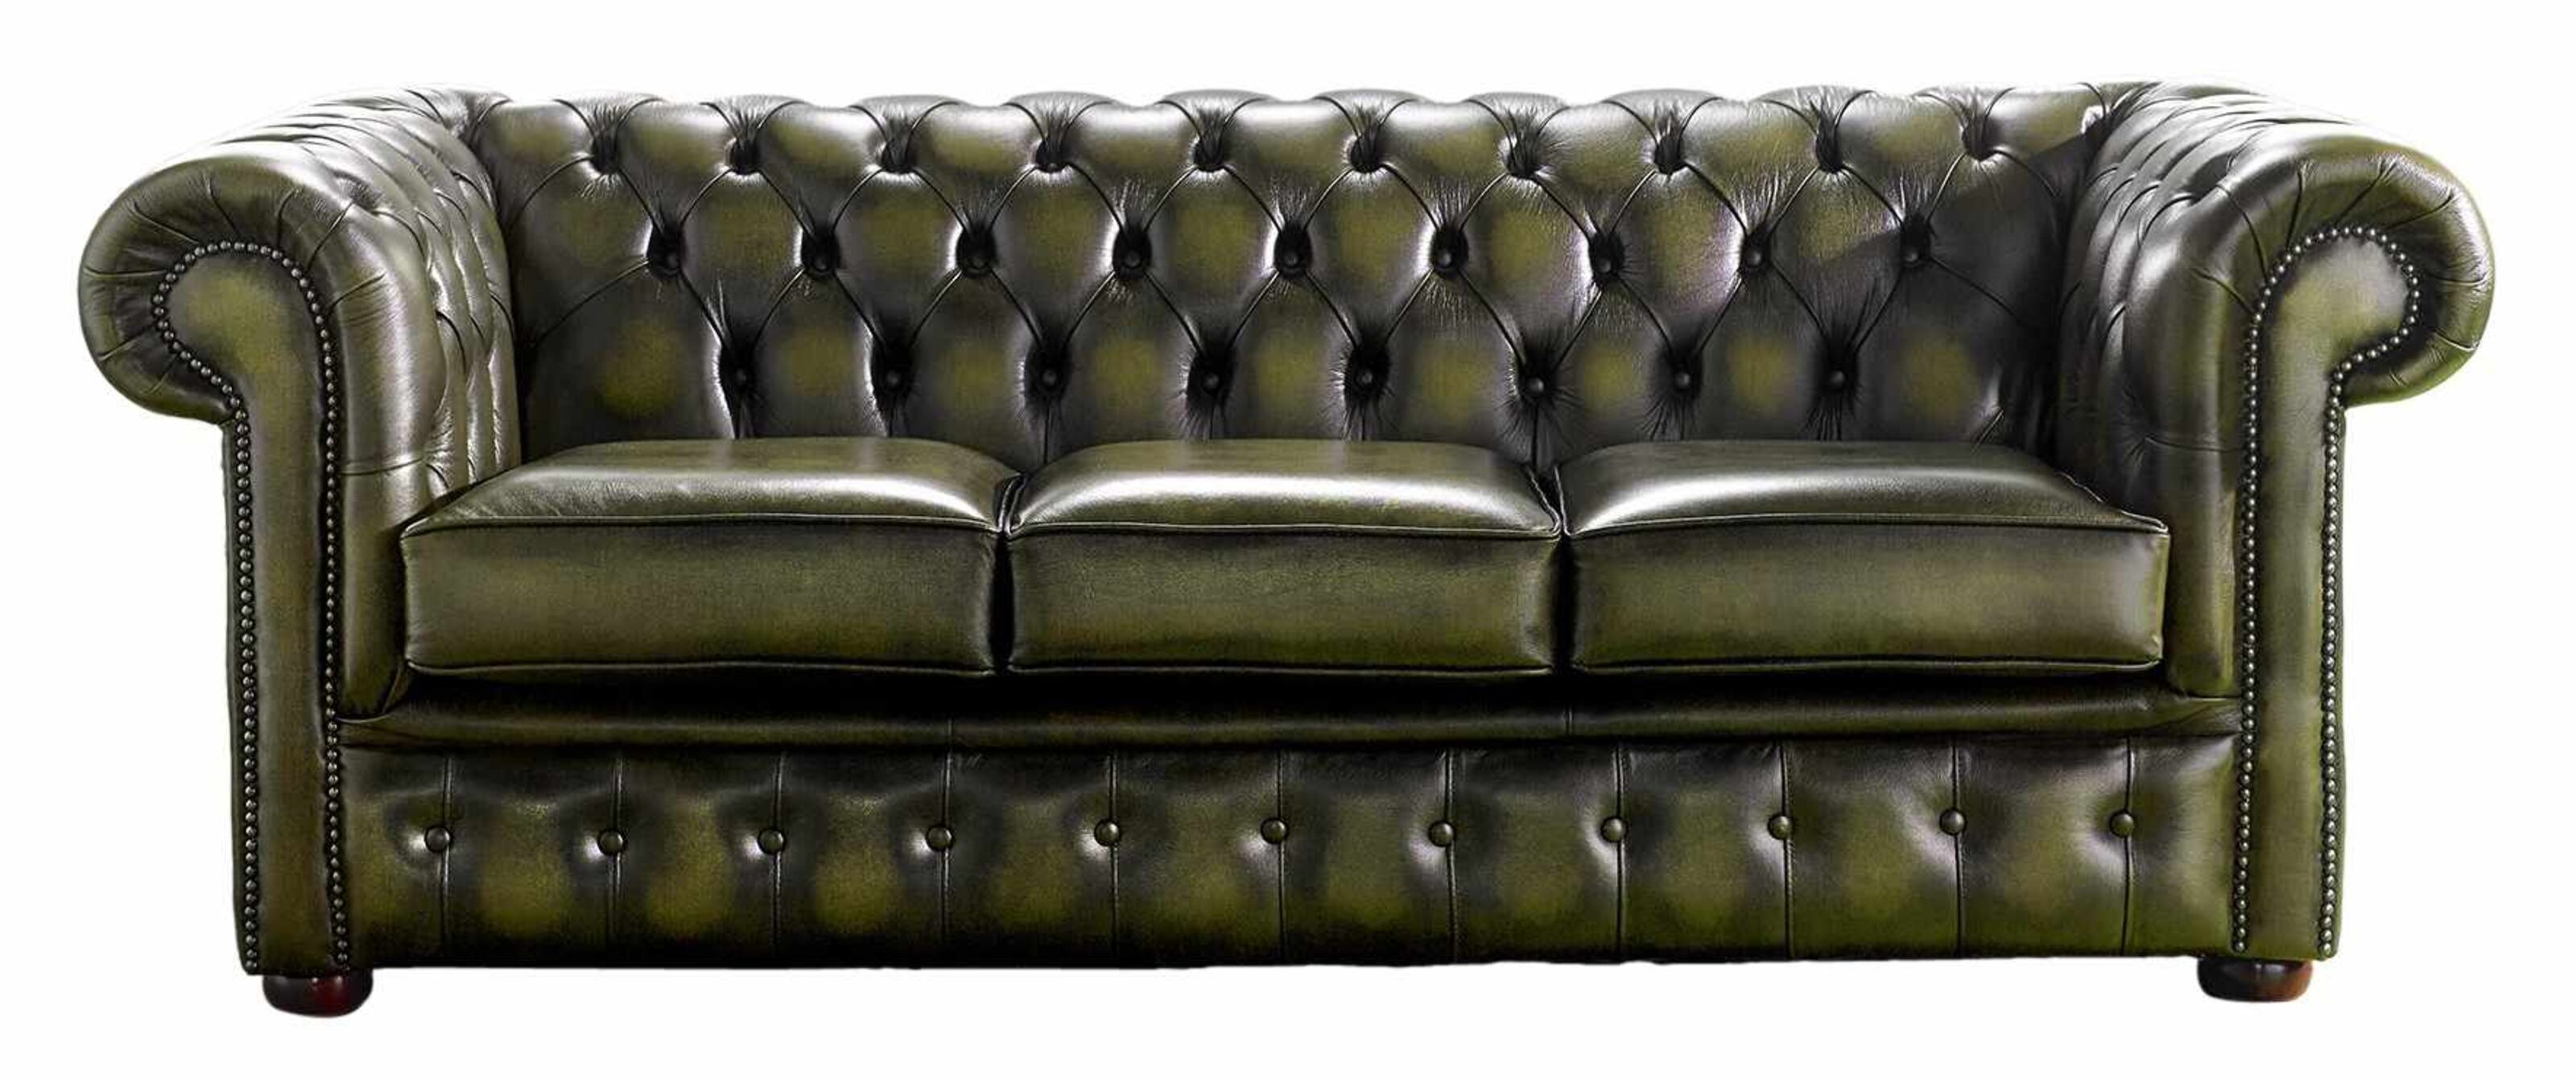 Discovering Nearby Leather Chesterfield Sofas Luxurious Finds at Your Fingertips  %Post Title